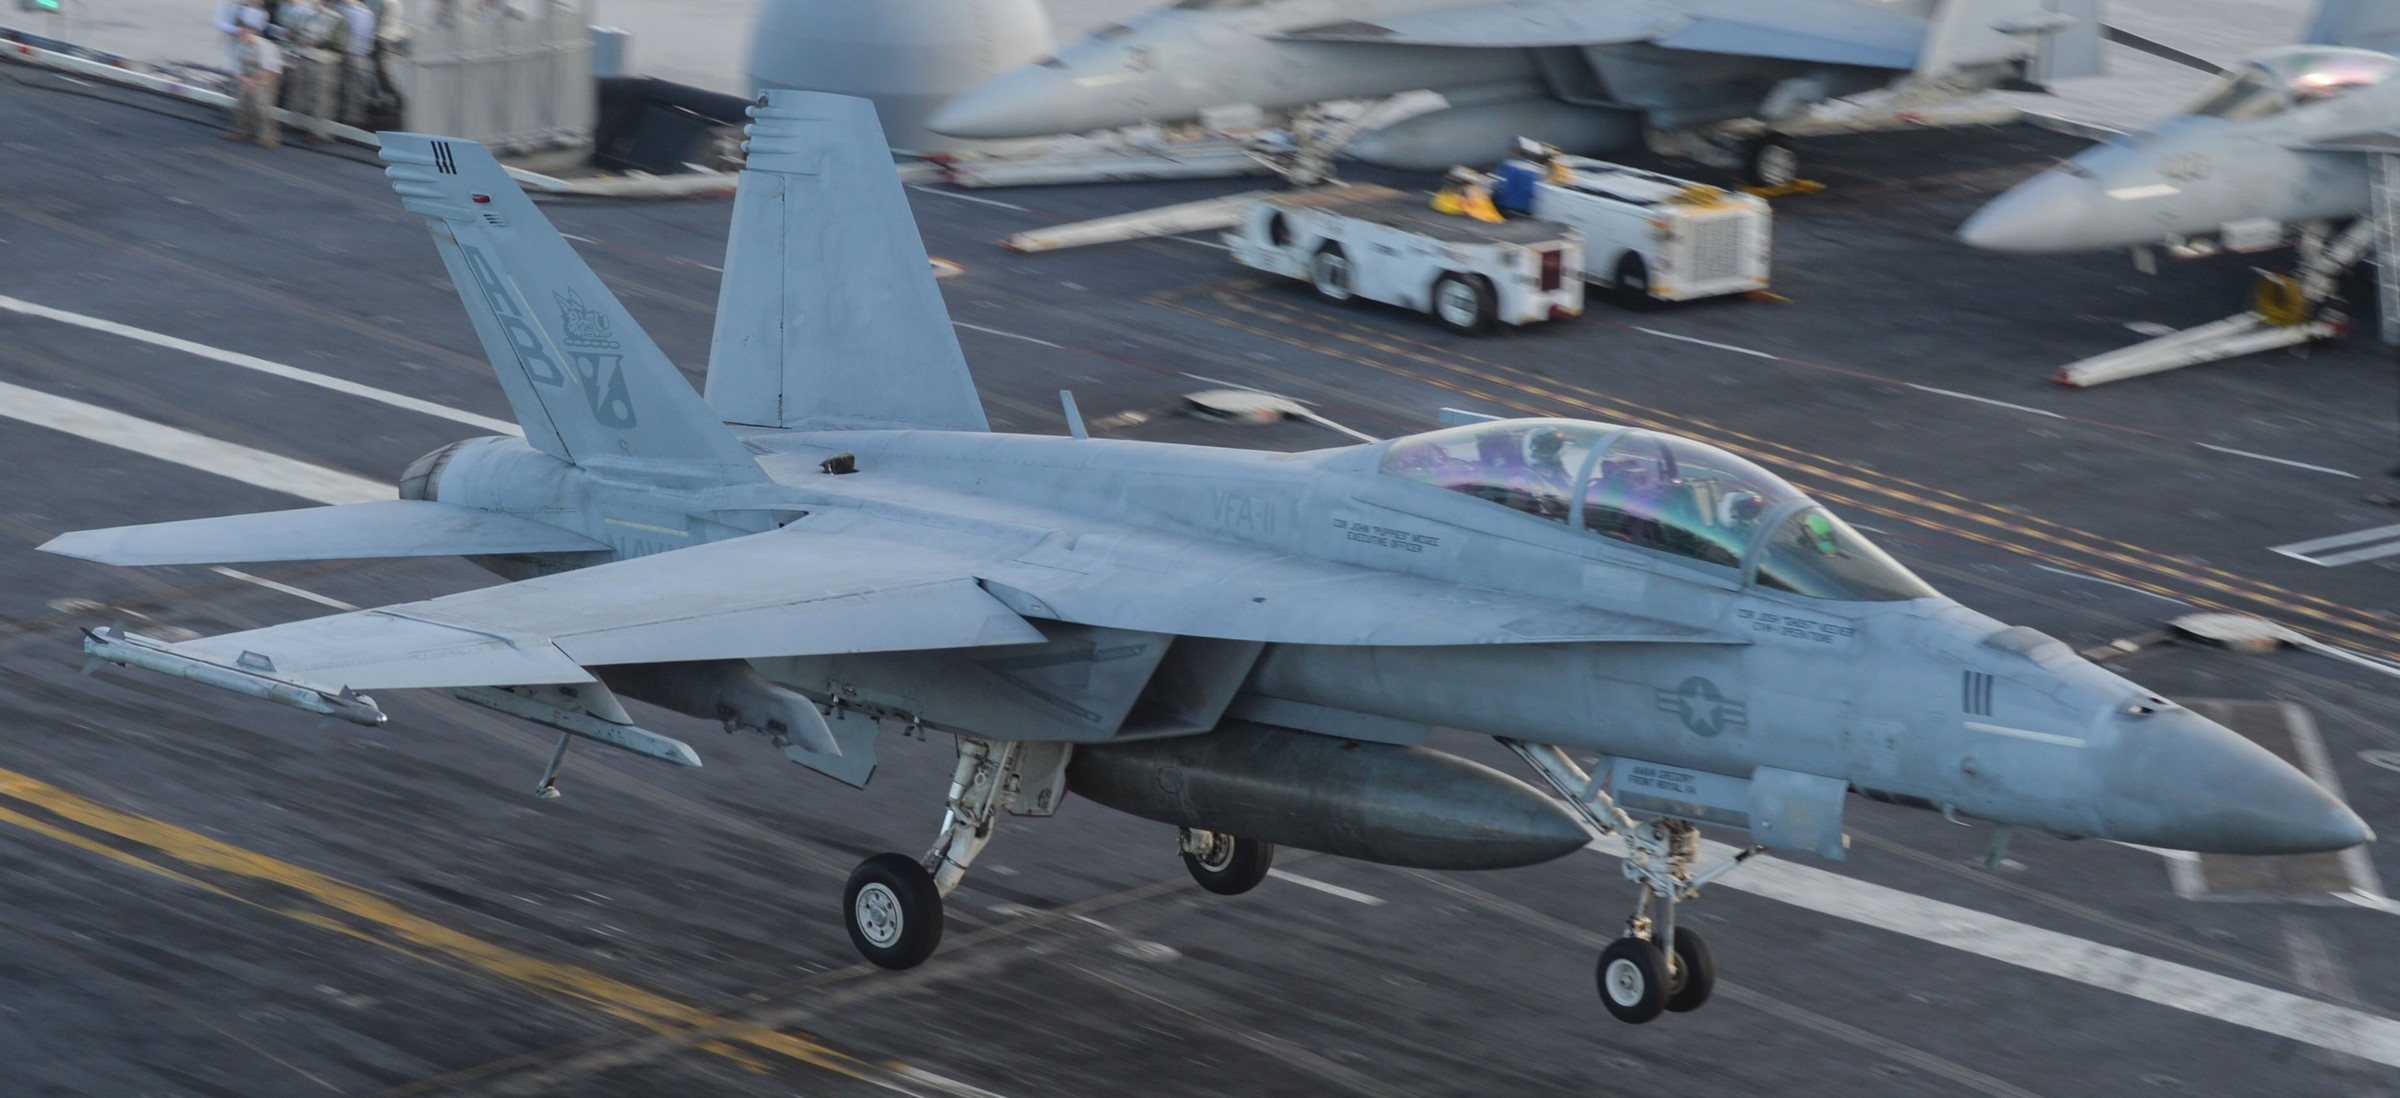 vfa-11 red rippers strike fighter squadron us navy f/a-18f super hornet carrier air wing cvw-1 uss harry s. truman cvn-75 62